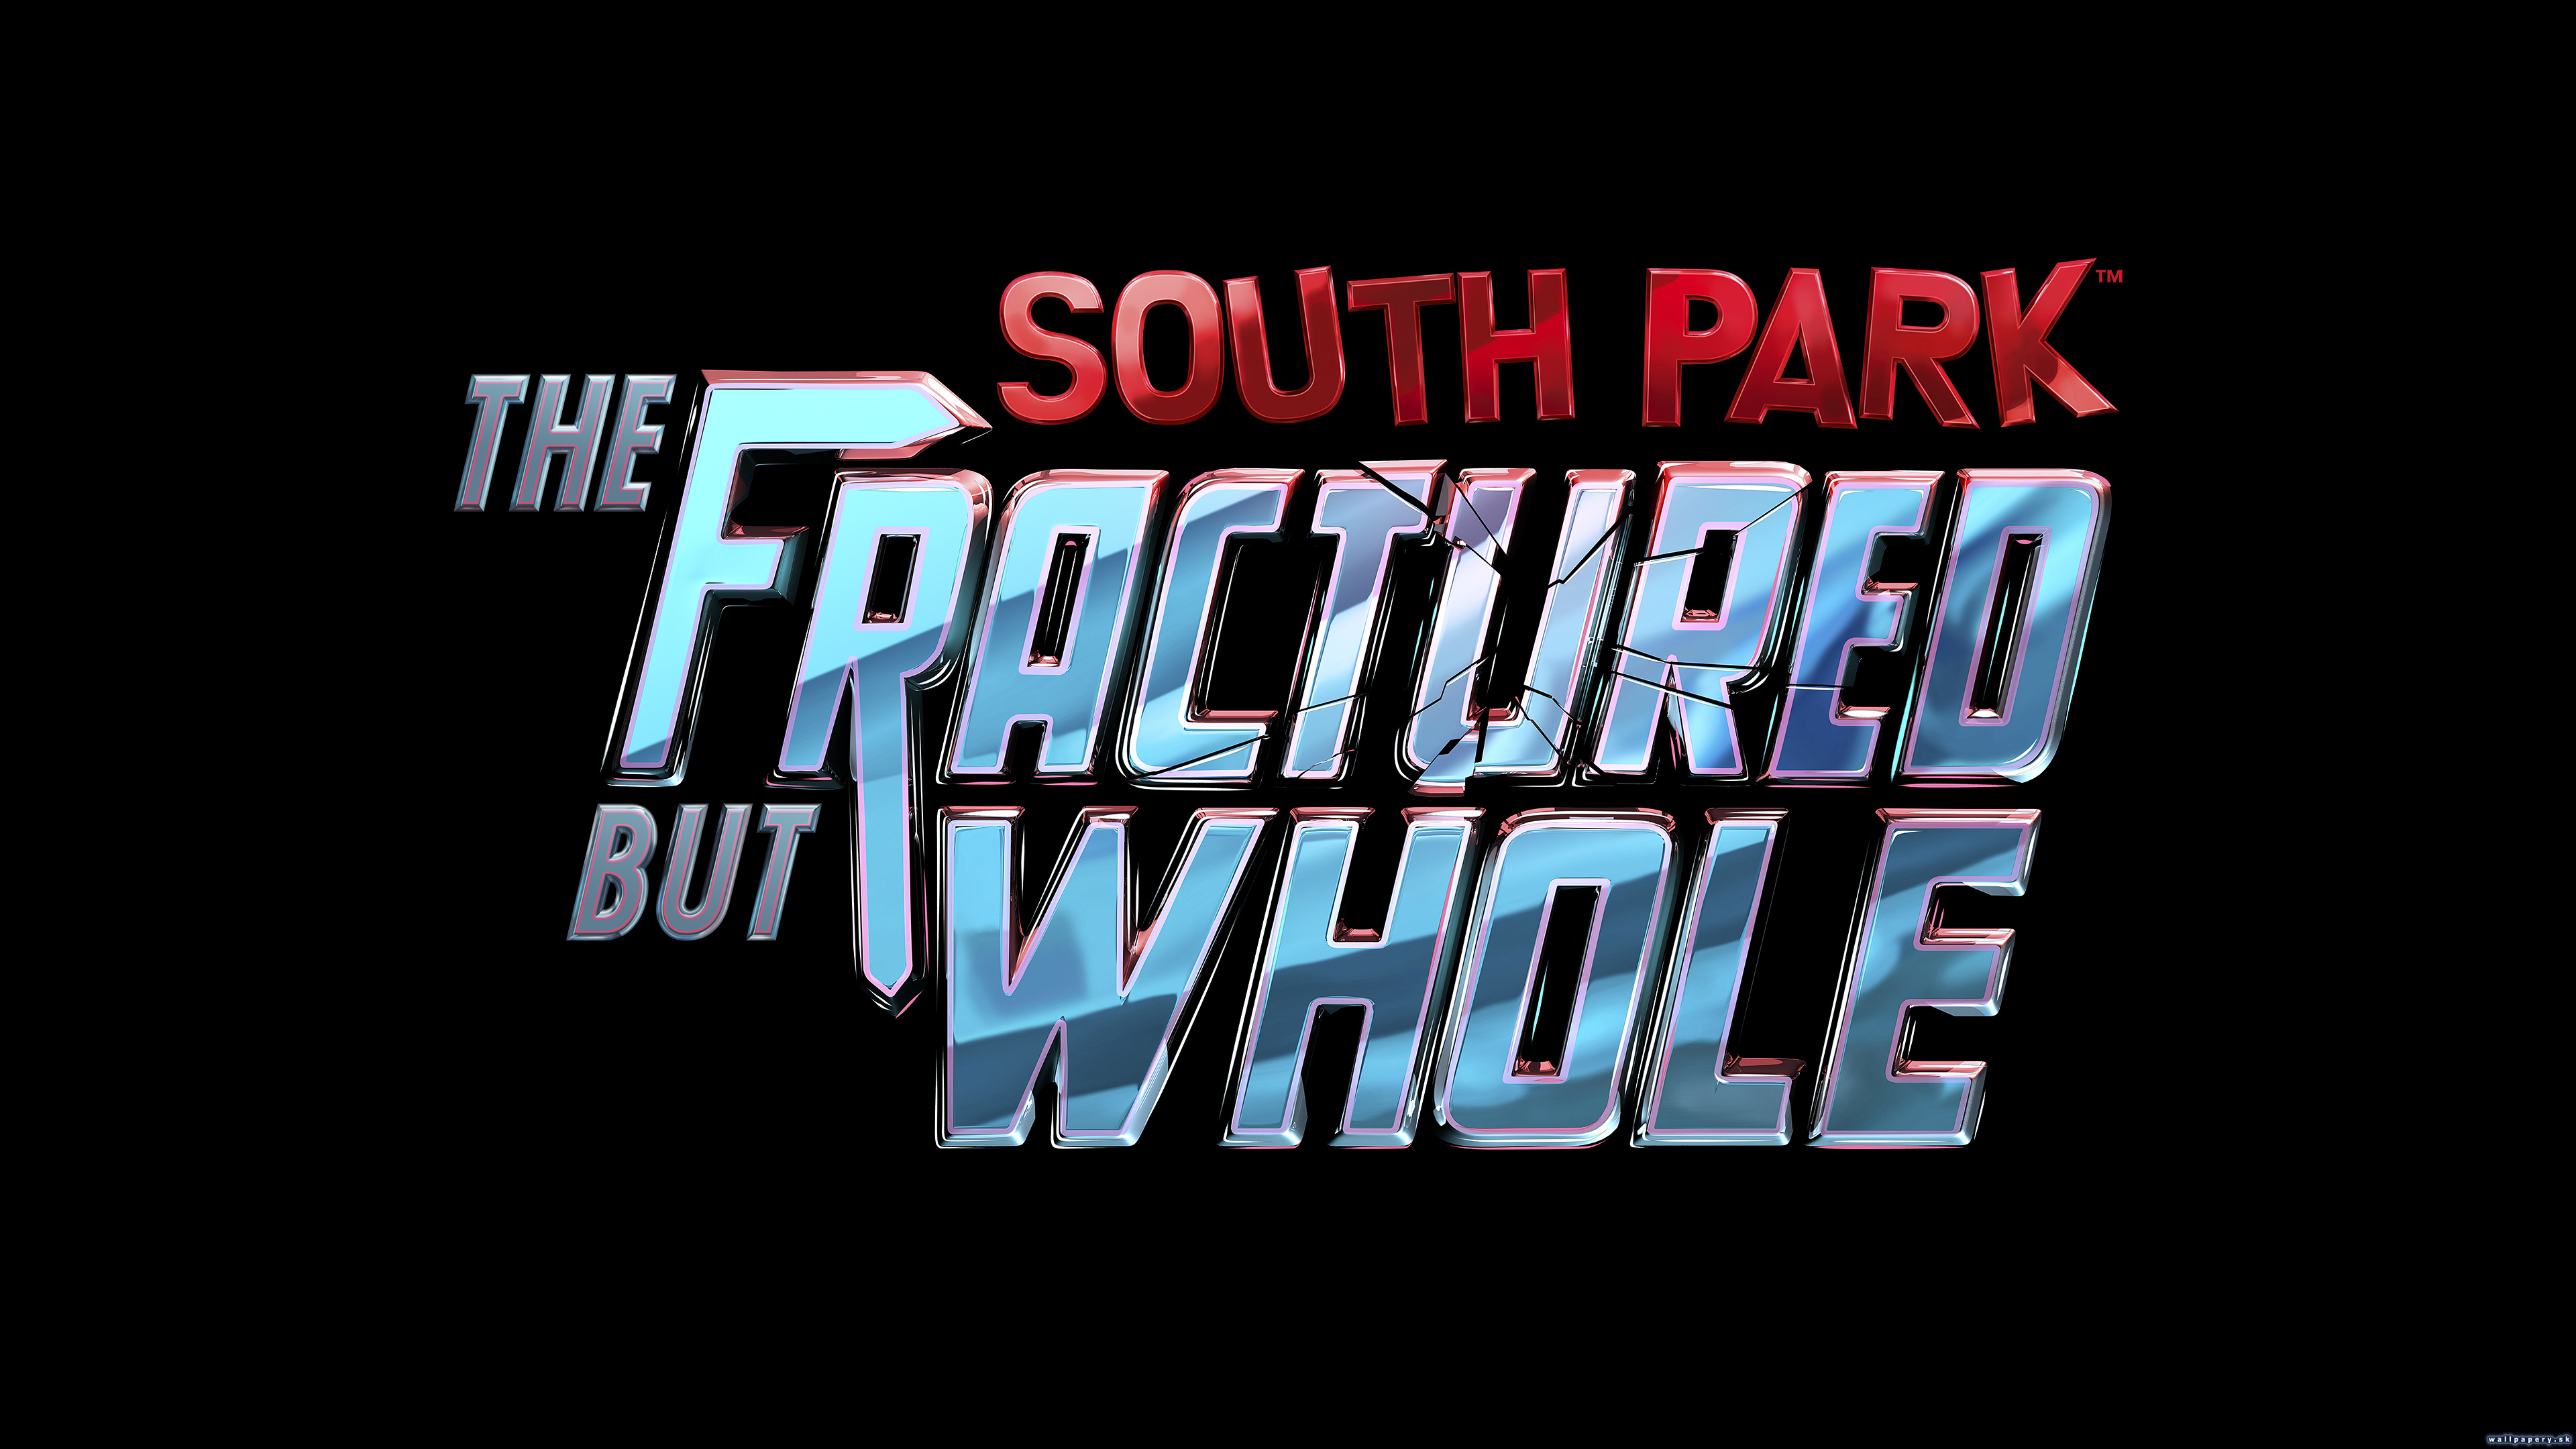 South Park: The Fractured but Whole - wallpaper 2